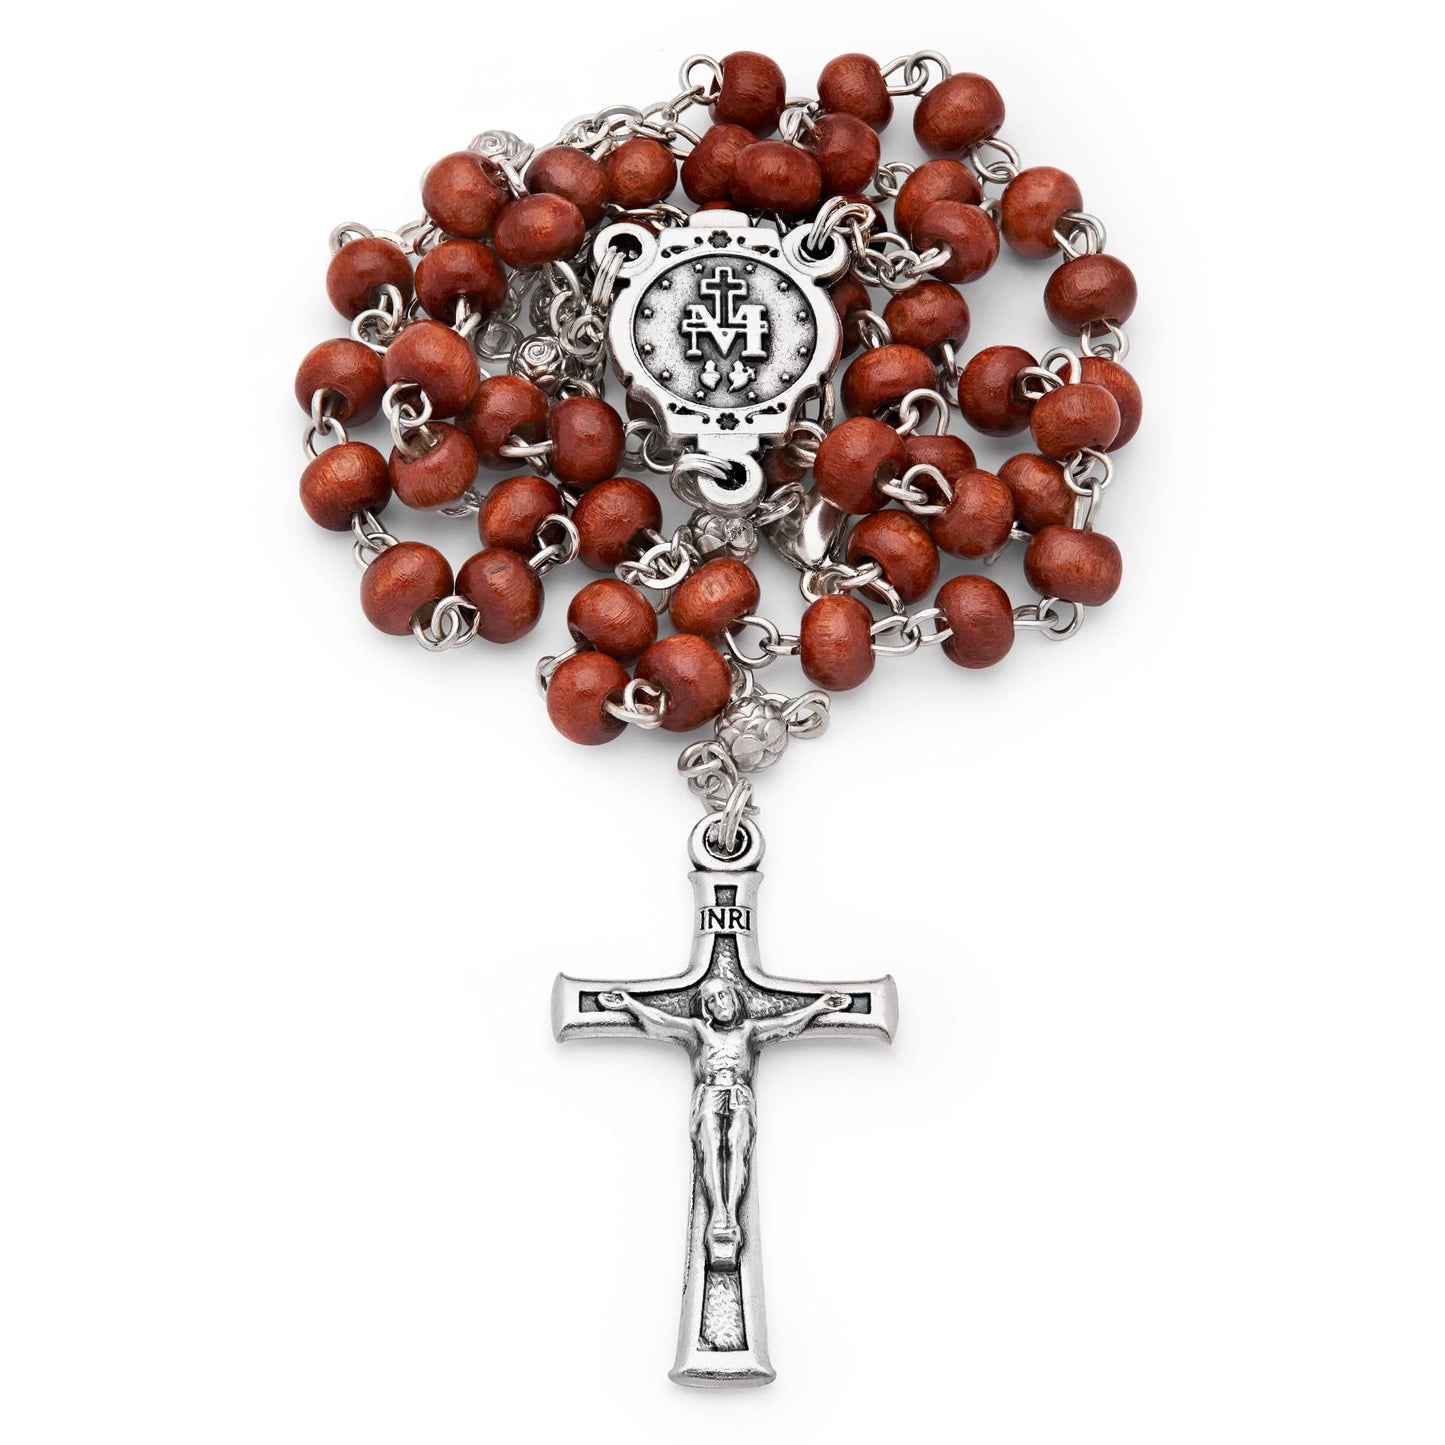 MONDO CATTOLICO Prayer Beads 38 cm (14.96 in) / 4 mm (0.15 in) Miraculous Virgin Box and Rosary in Wooden